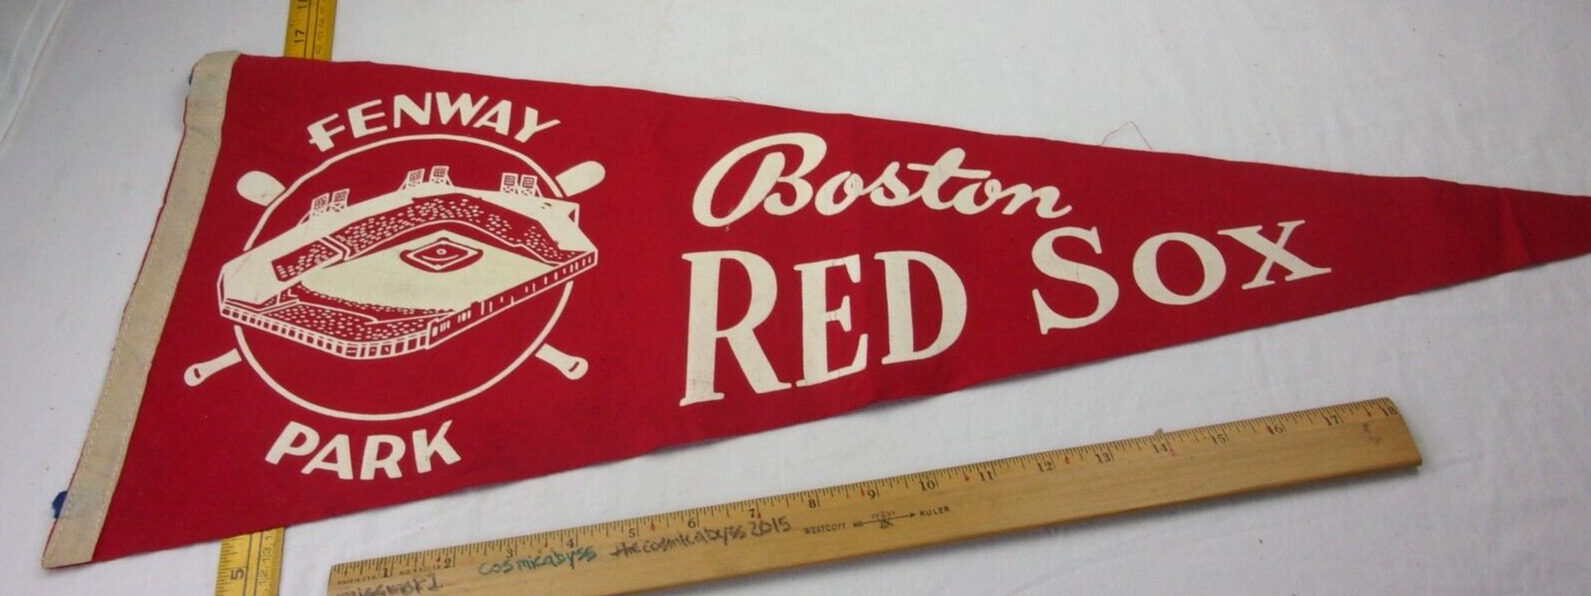 Boston Red Sox Fenway Park 1960s full sized pennant VINTAGE